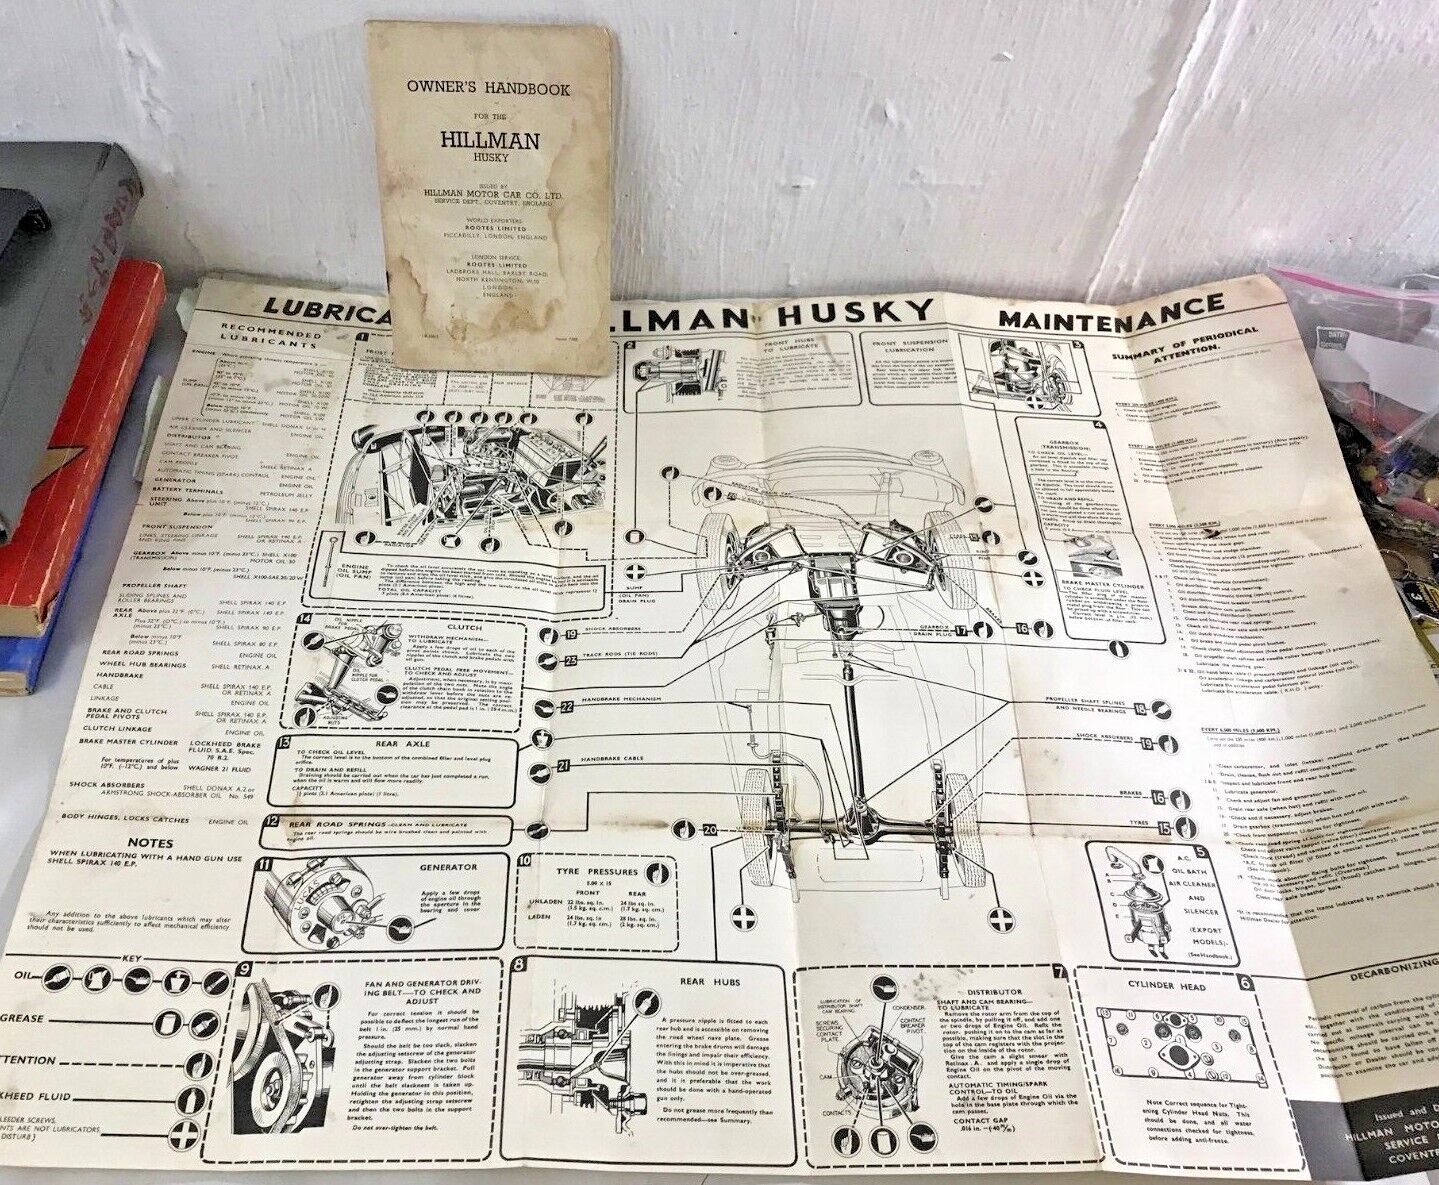 Hillman 1955 Owner's Handbook For Husky Plus The Lubrication Chart  Car